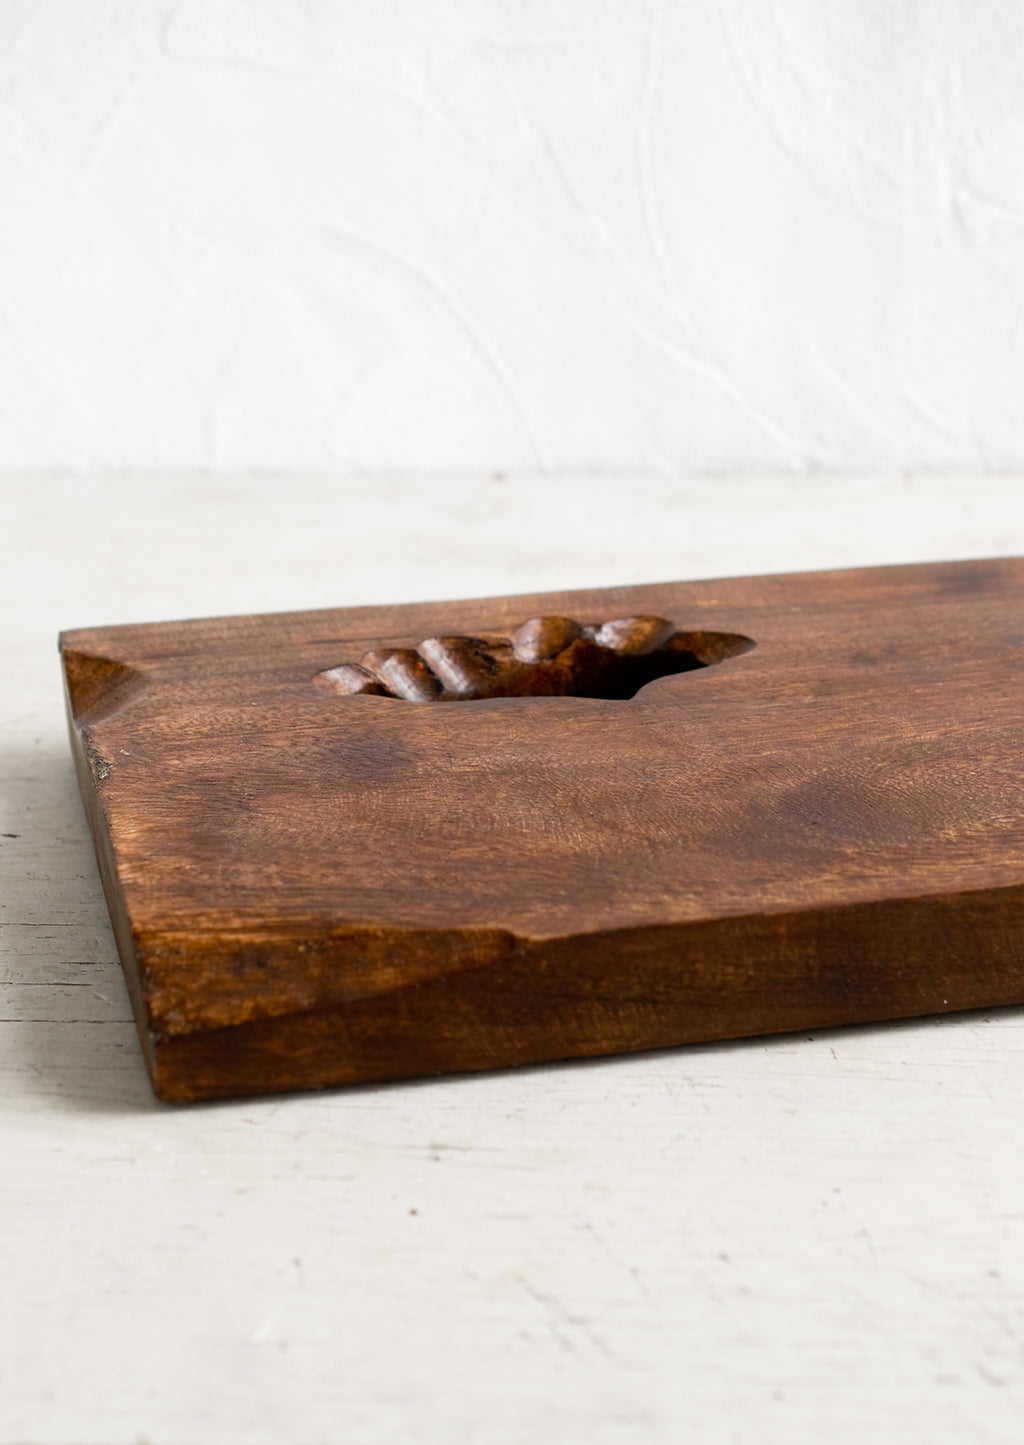 2: A rectangular wooden cutting board with knot cutout detail.